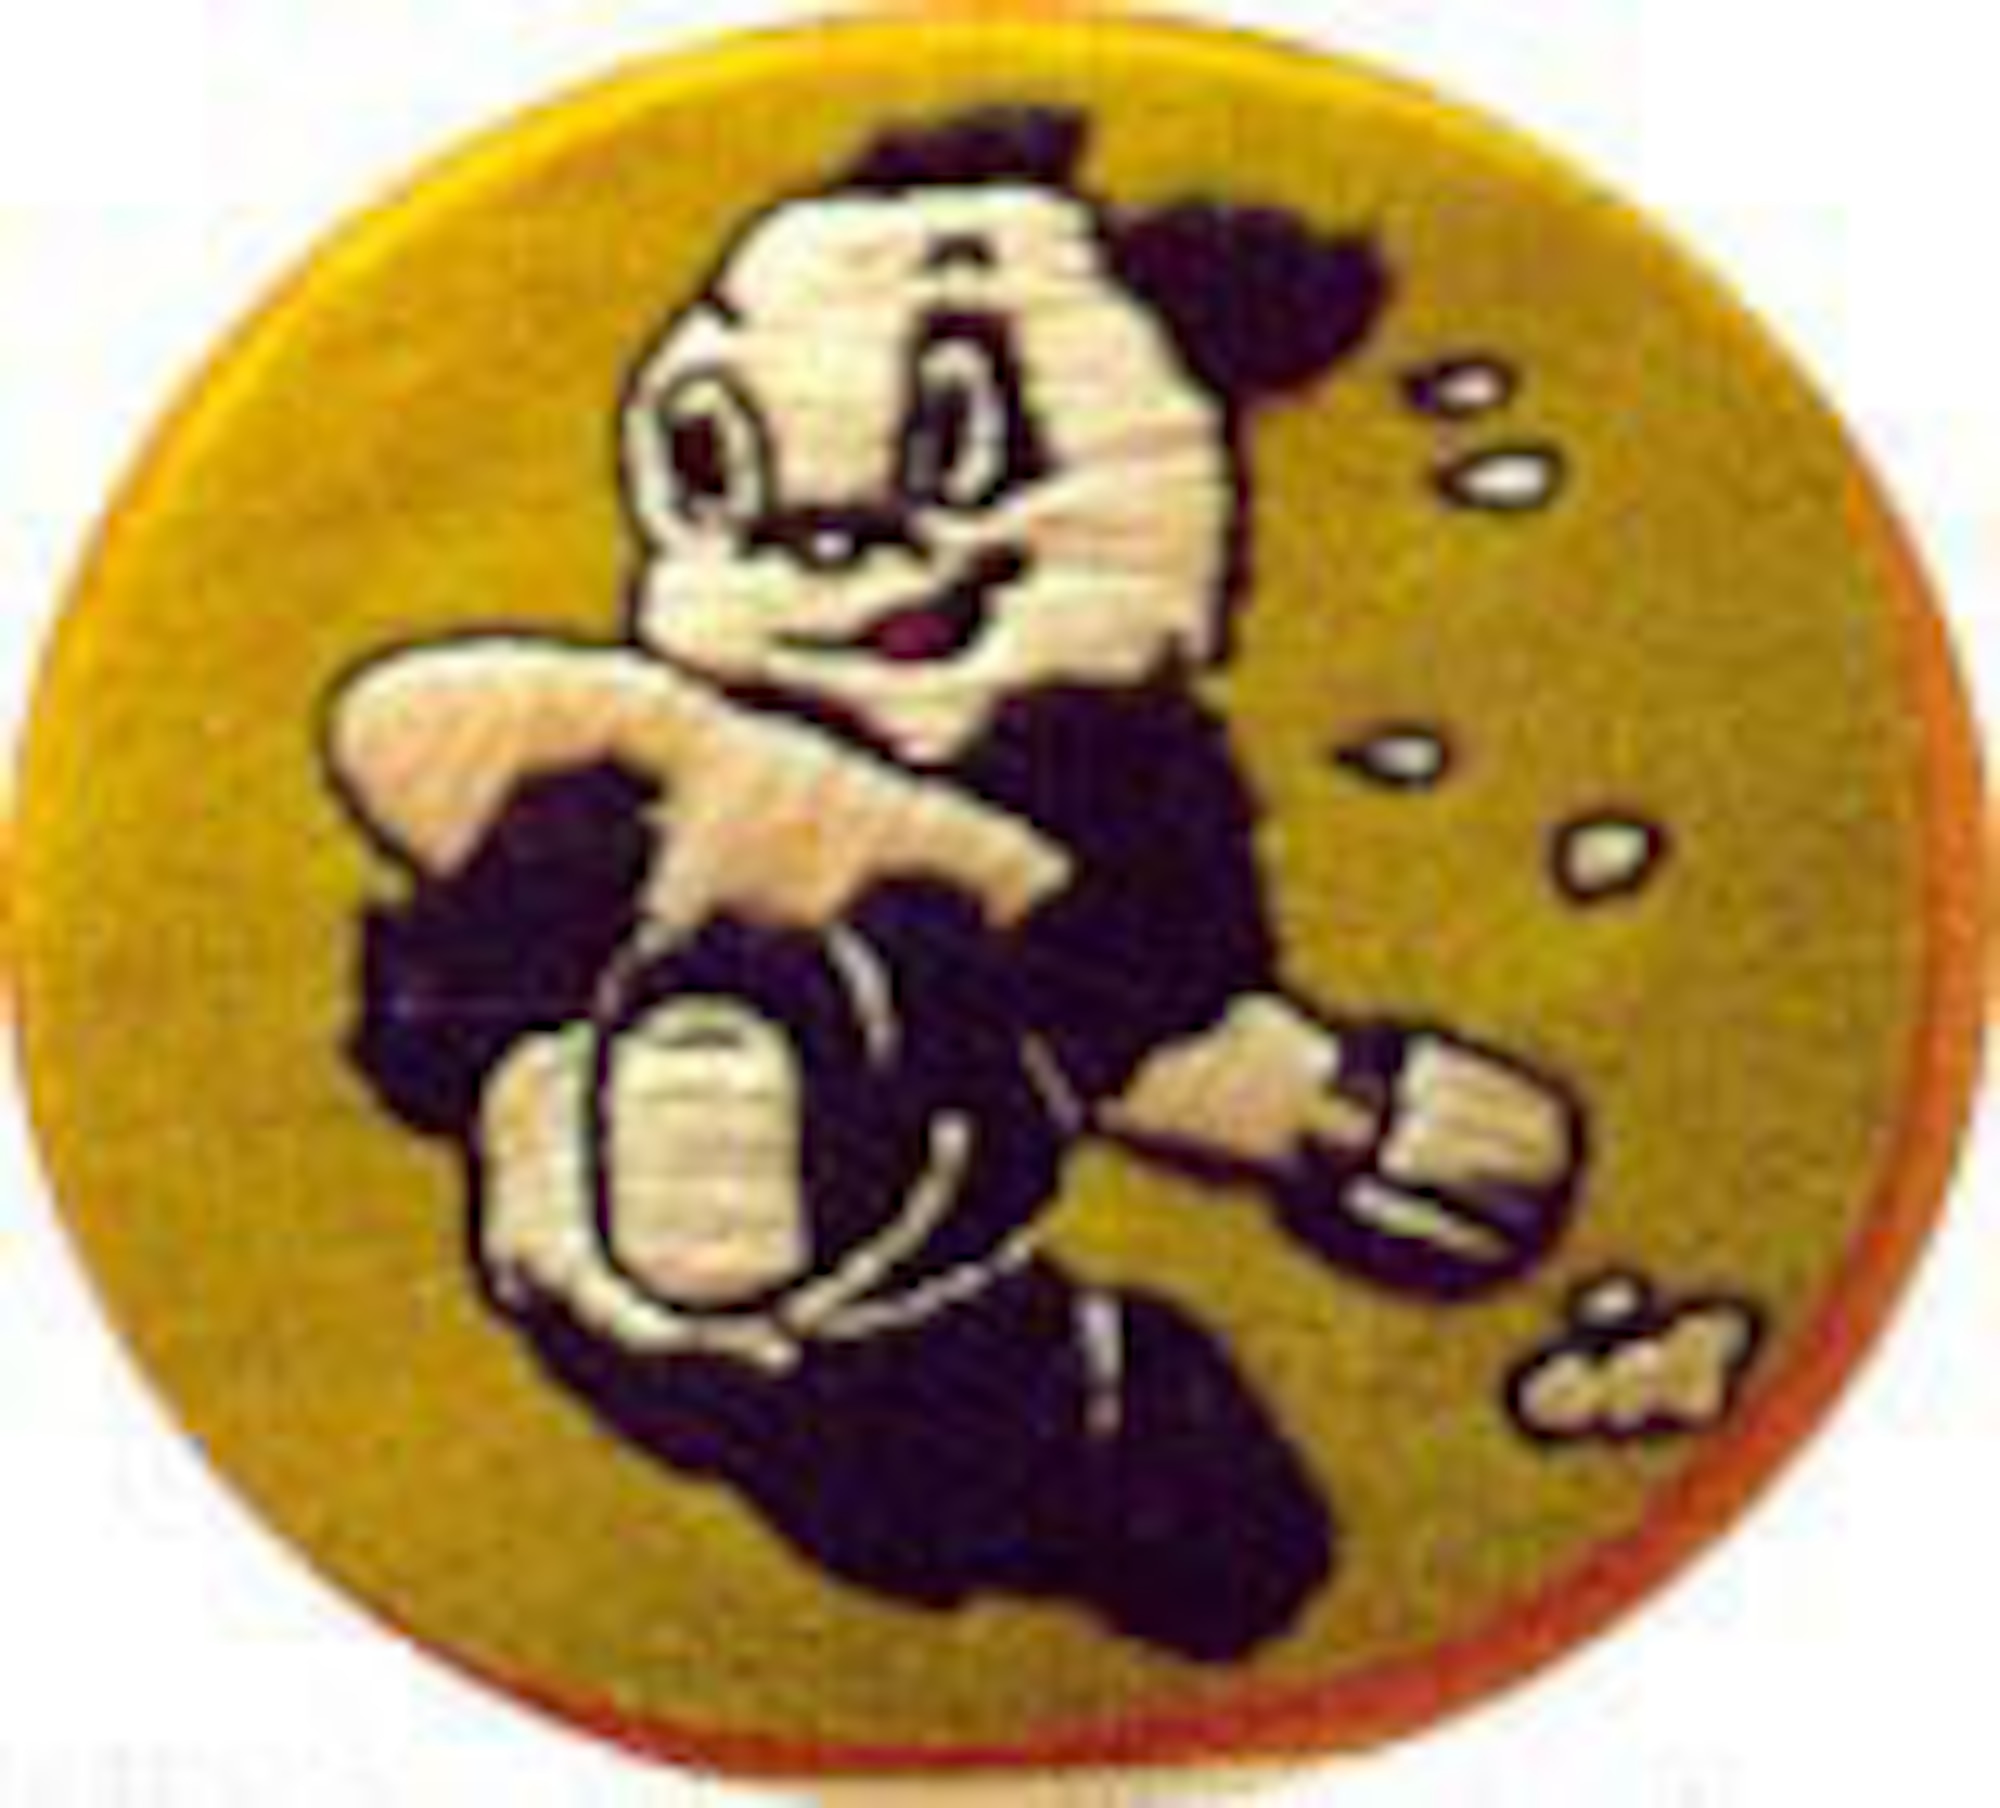 Jacket patch worn by Sgt. John D. Foley as a B-24 crew member with the 409th Bomb Squadron based in England in 1944. (U.S. Air Force photo)